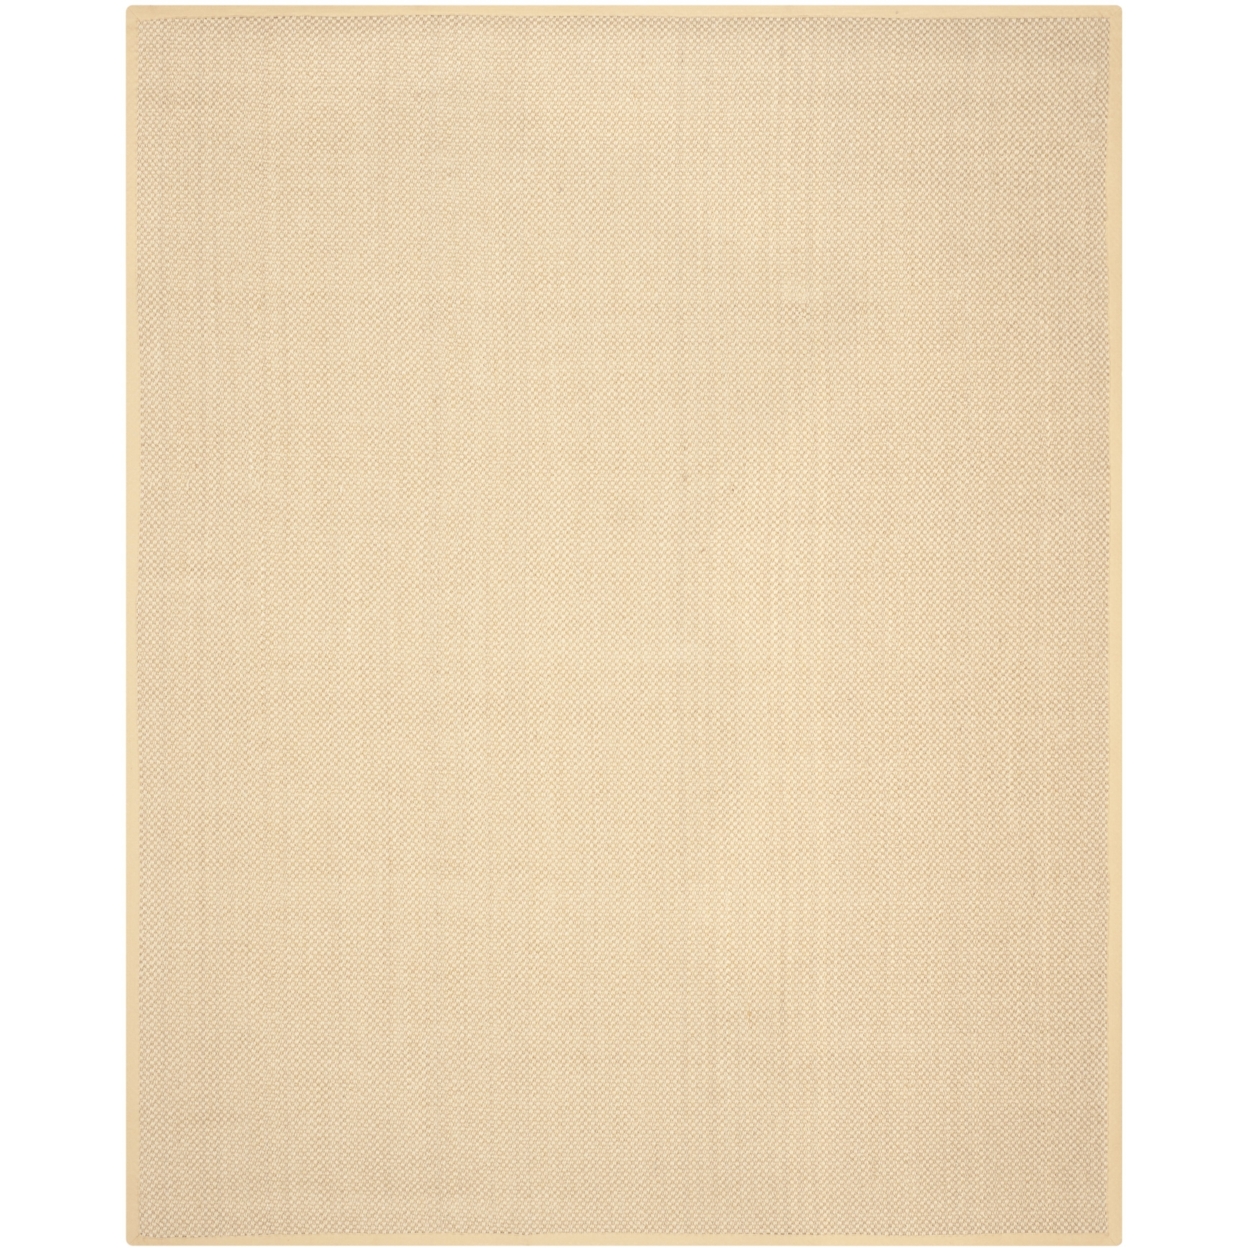 SAFAVIEH Natural Fiber Collection NF443A Maize/Wheat Rug - 8' X 10'